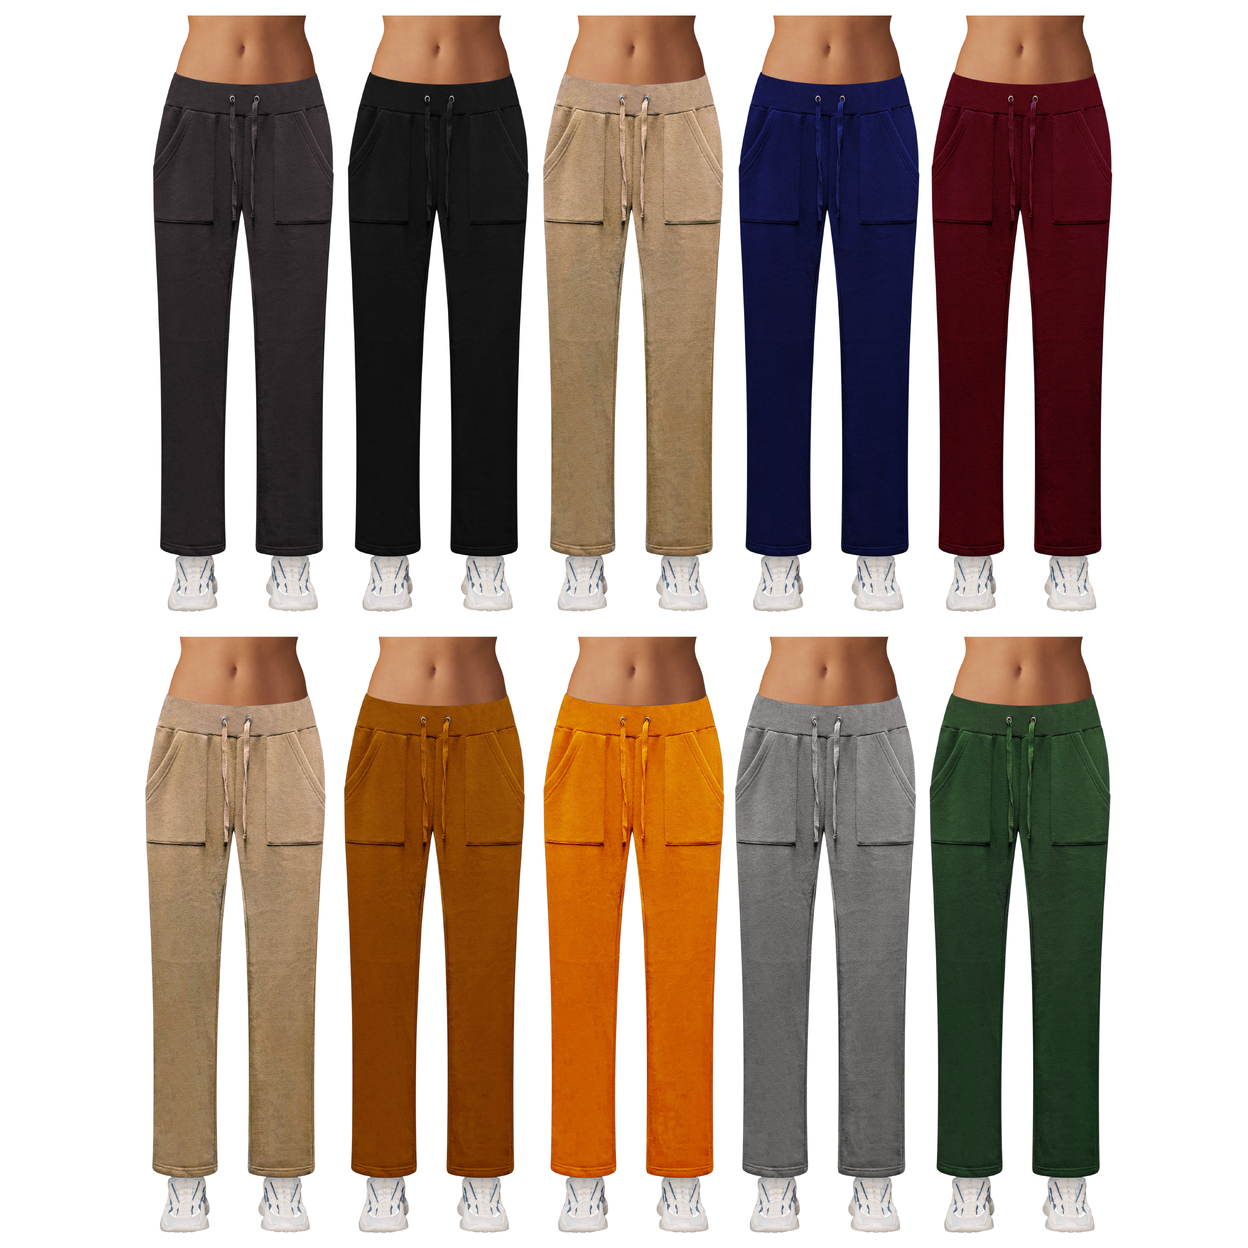 Multi-Pack: Women's Ultra-Soft Cozy Fleece Lined Elastic Waistband Terry Knit Pants - 3-pack, Xx-large